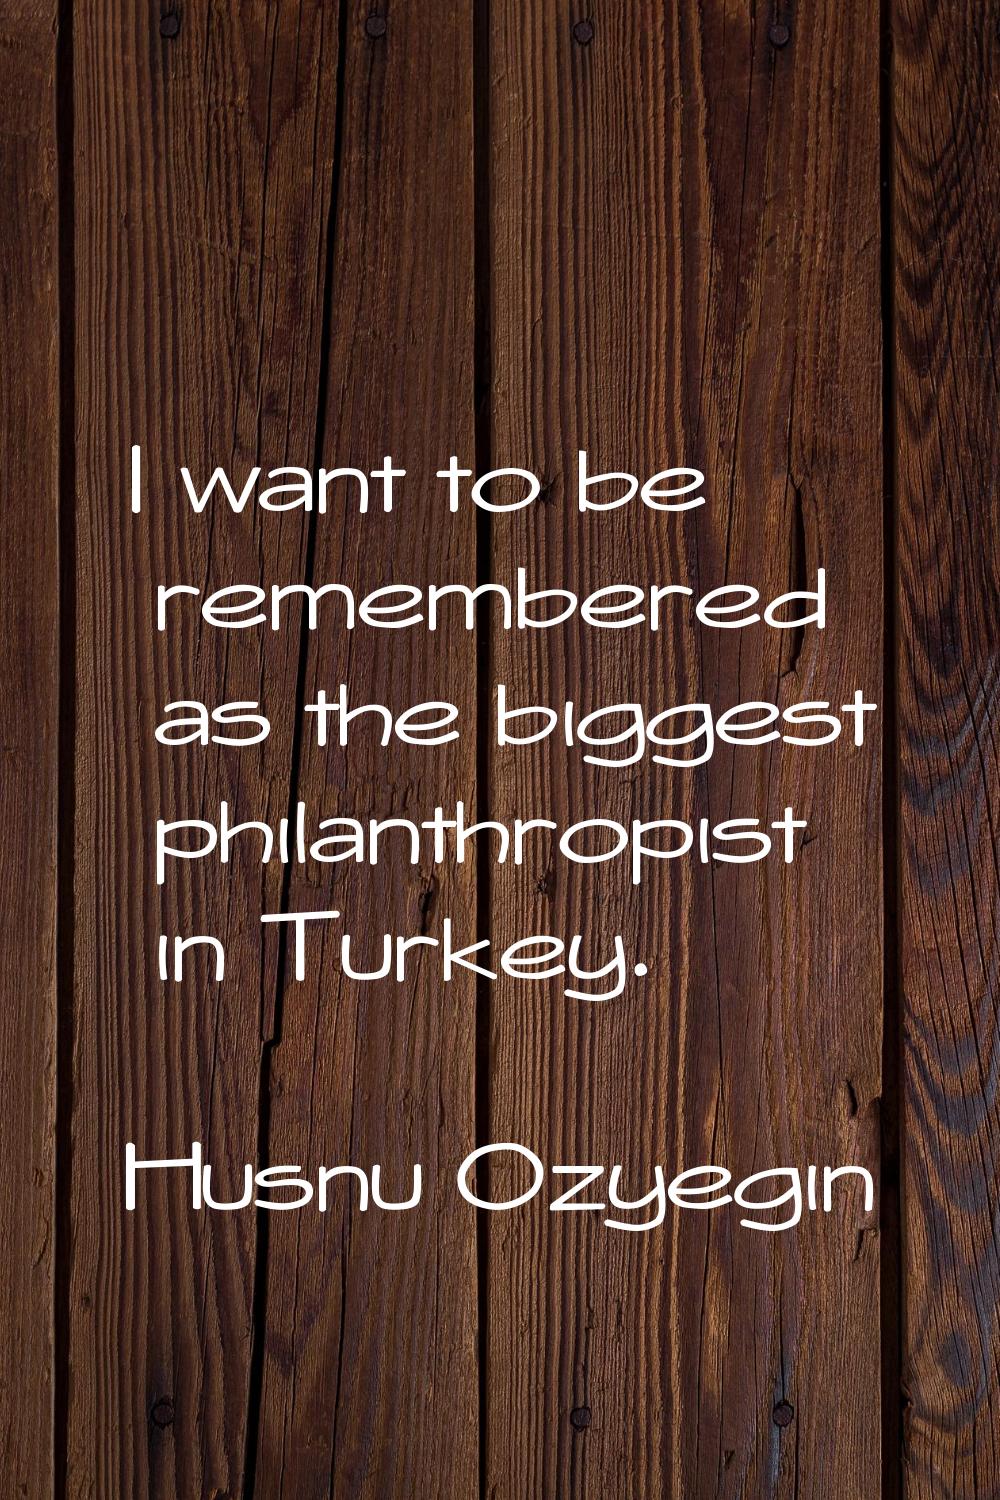 I want to be remembered as the biggest philanthropist in Turkey.